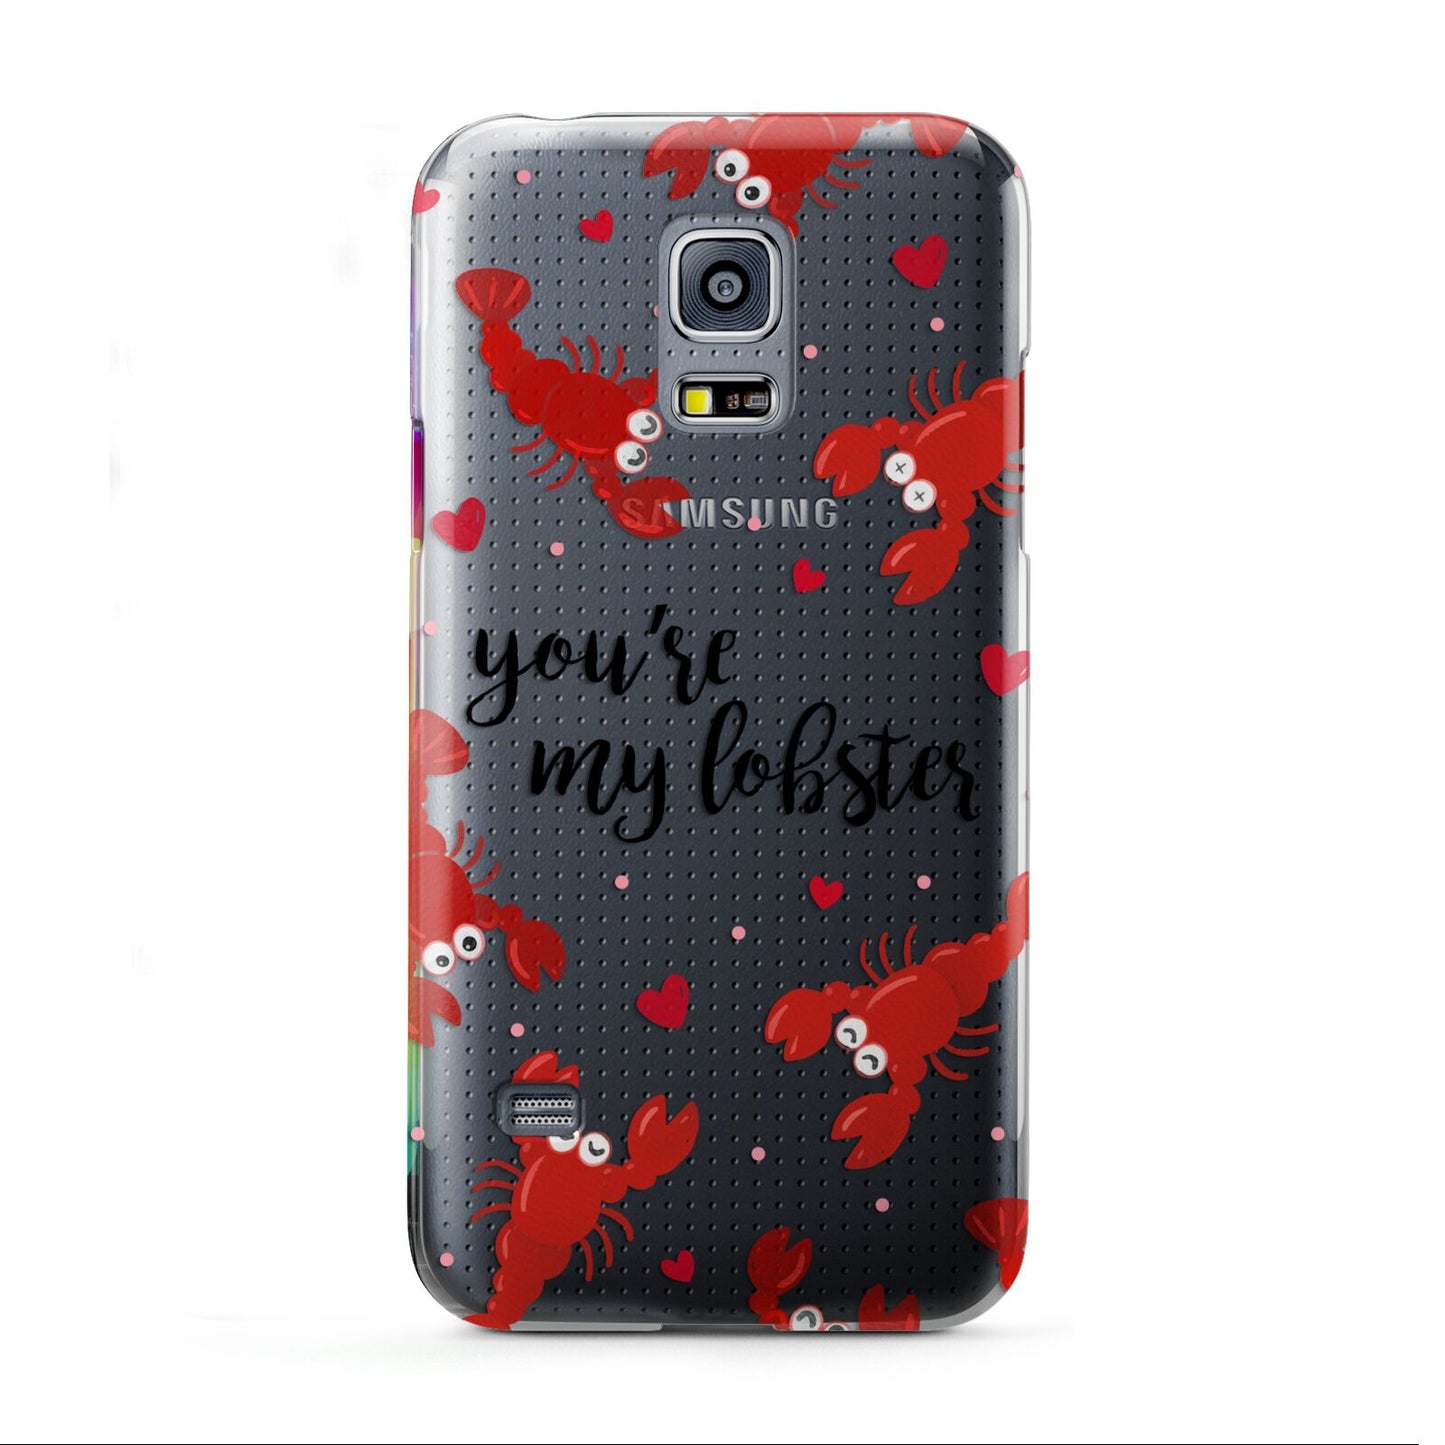 Youre My Lobster Samsung Galaxy S5 Mini Case